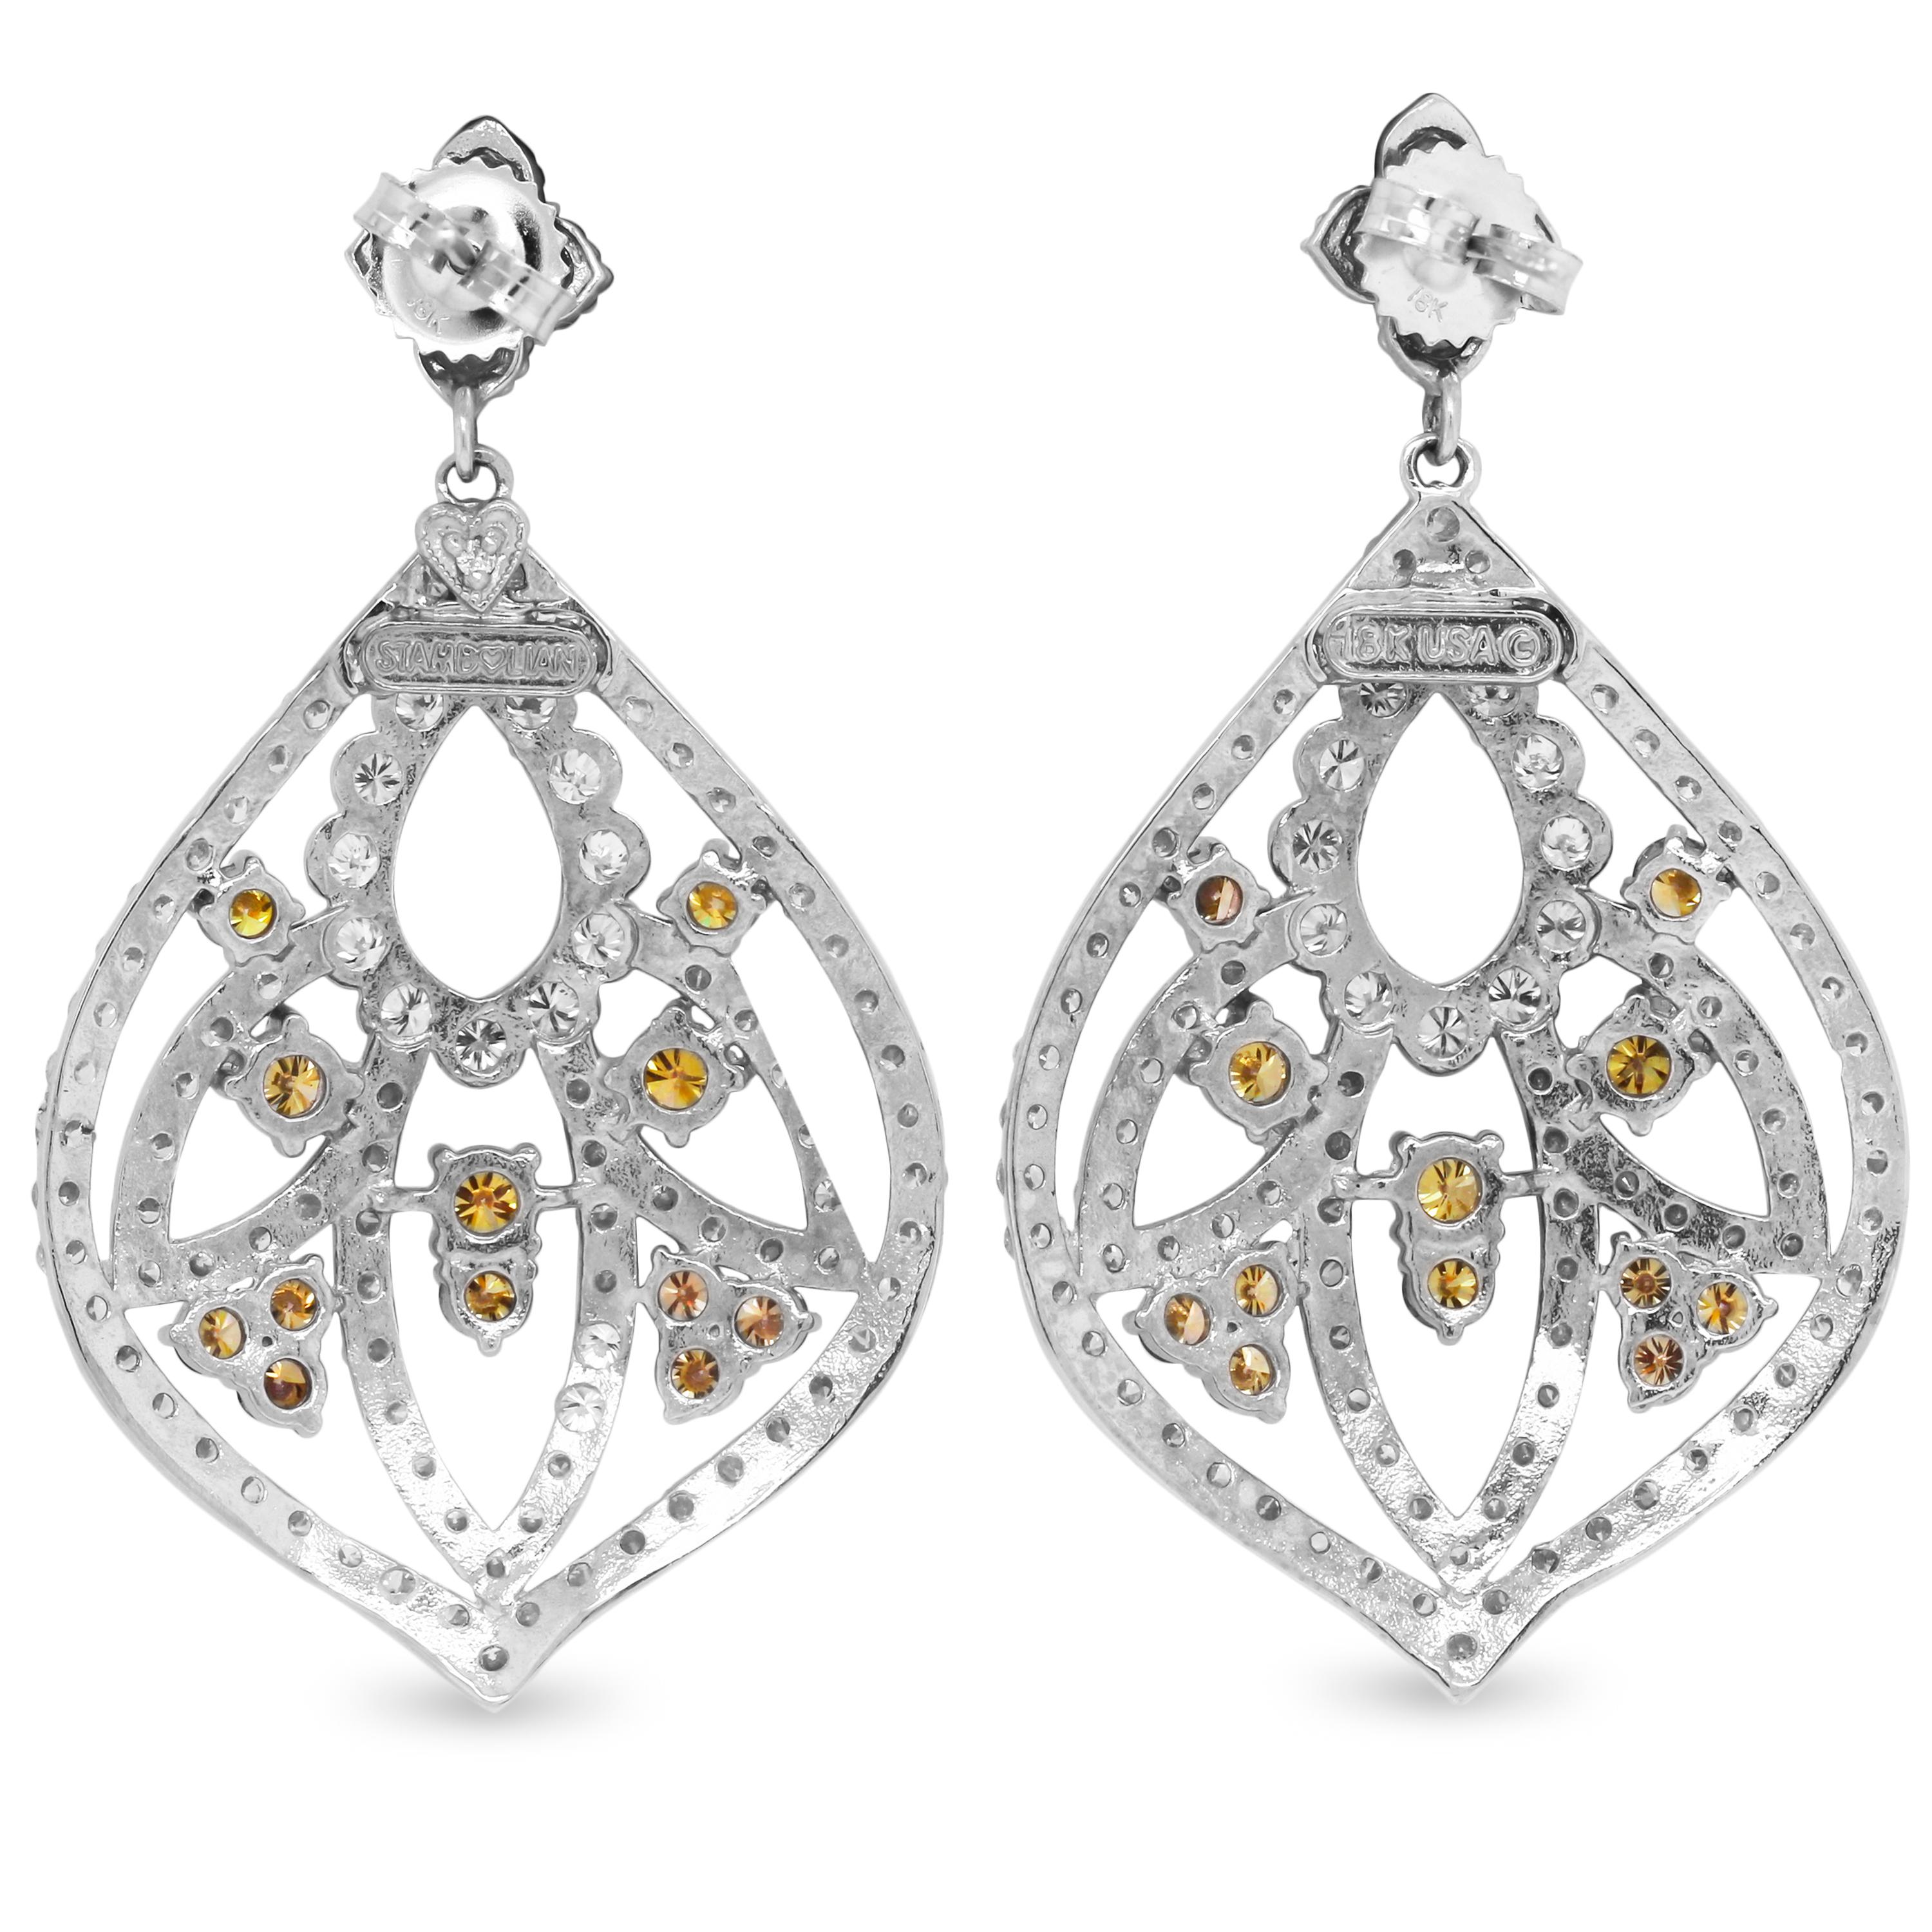 Round Cut Stambolian Canary Yellow and White Diamond 18 Karat Gold Chandelier Earrings